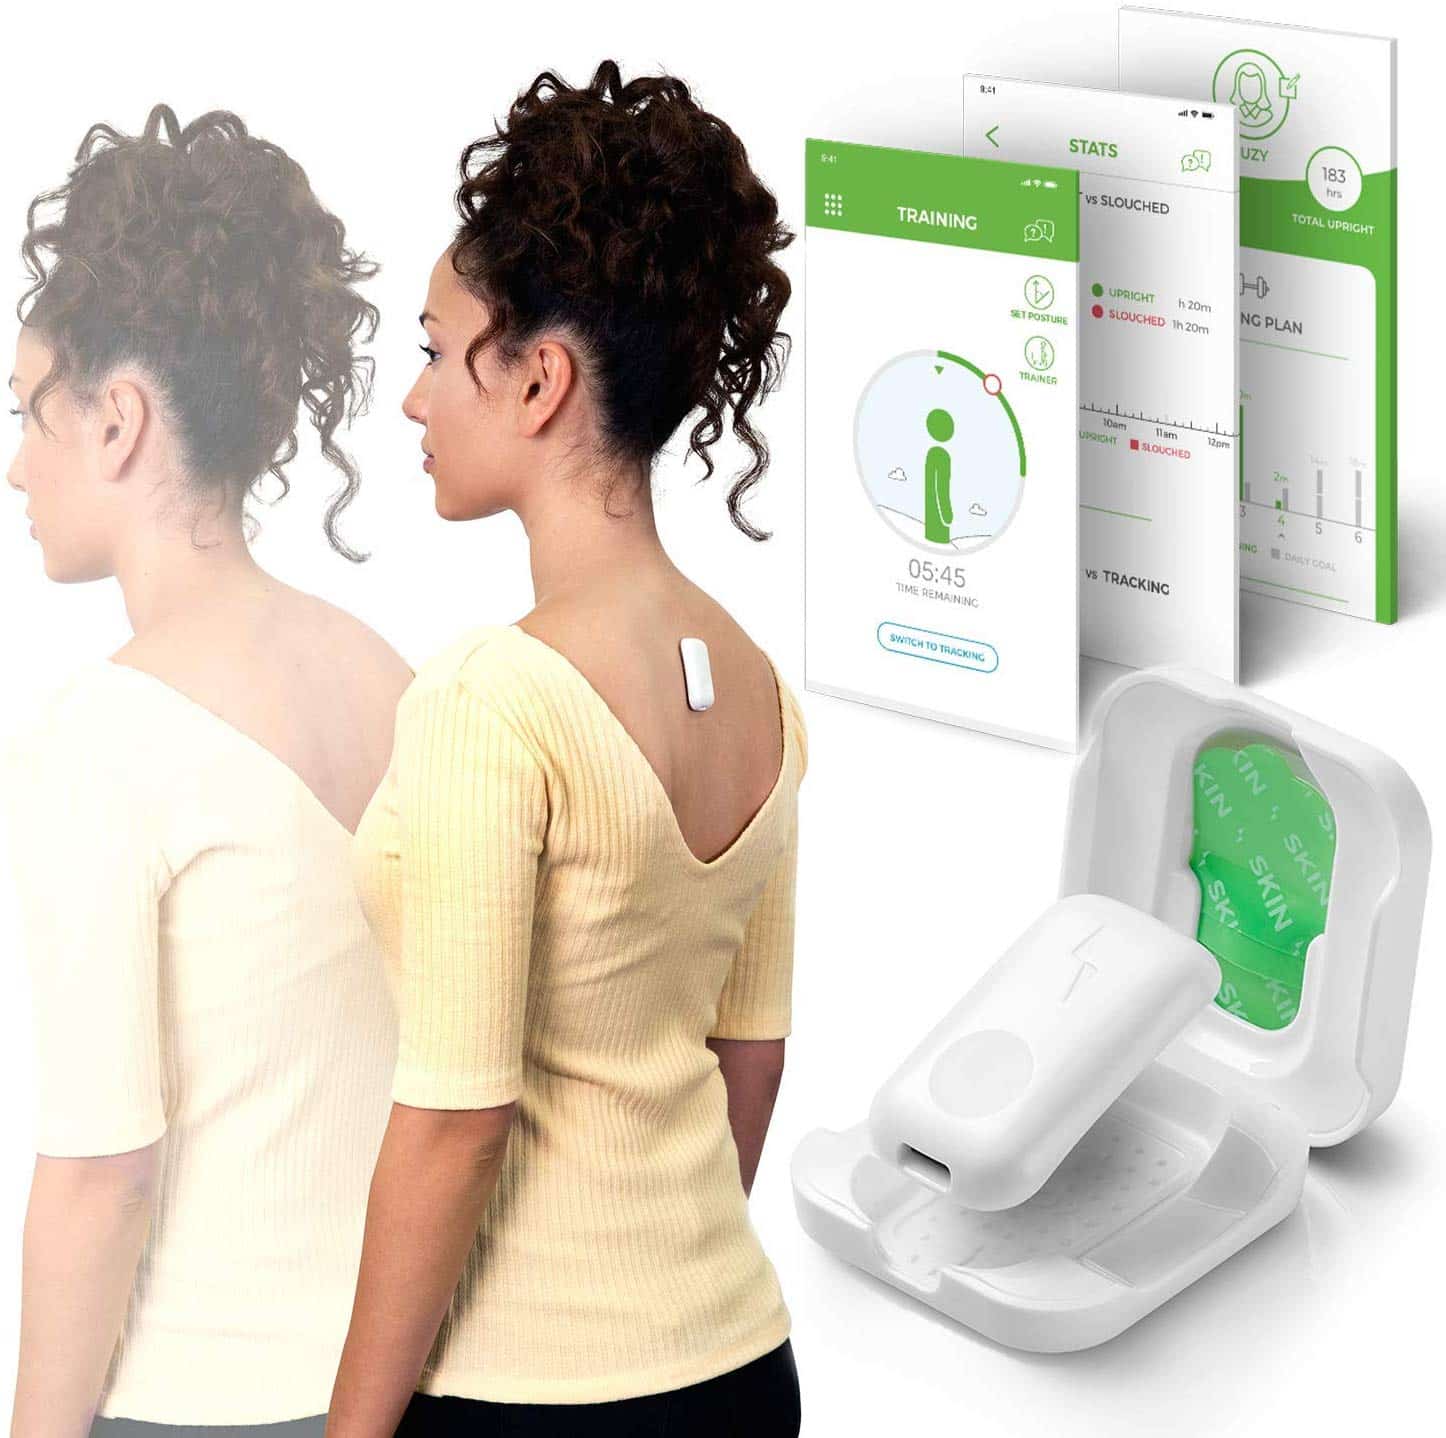 Cool Tech Gifts 2020: Posture Trainer 2020